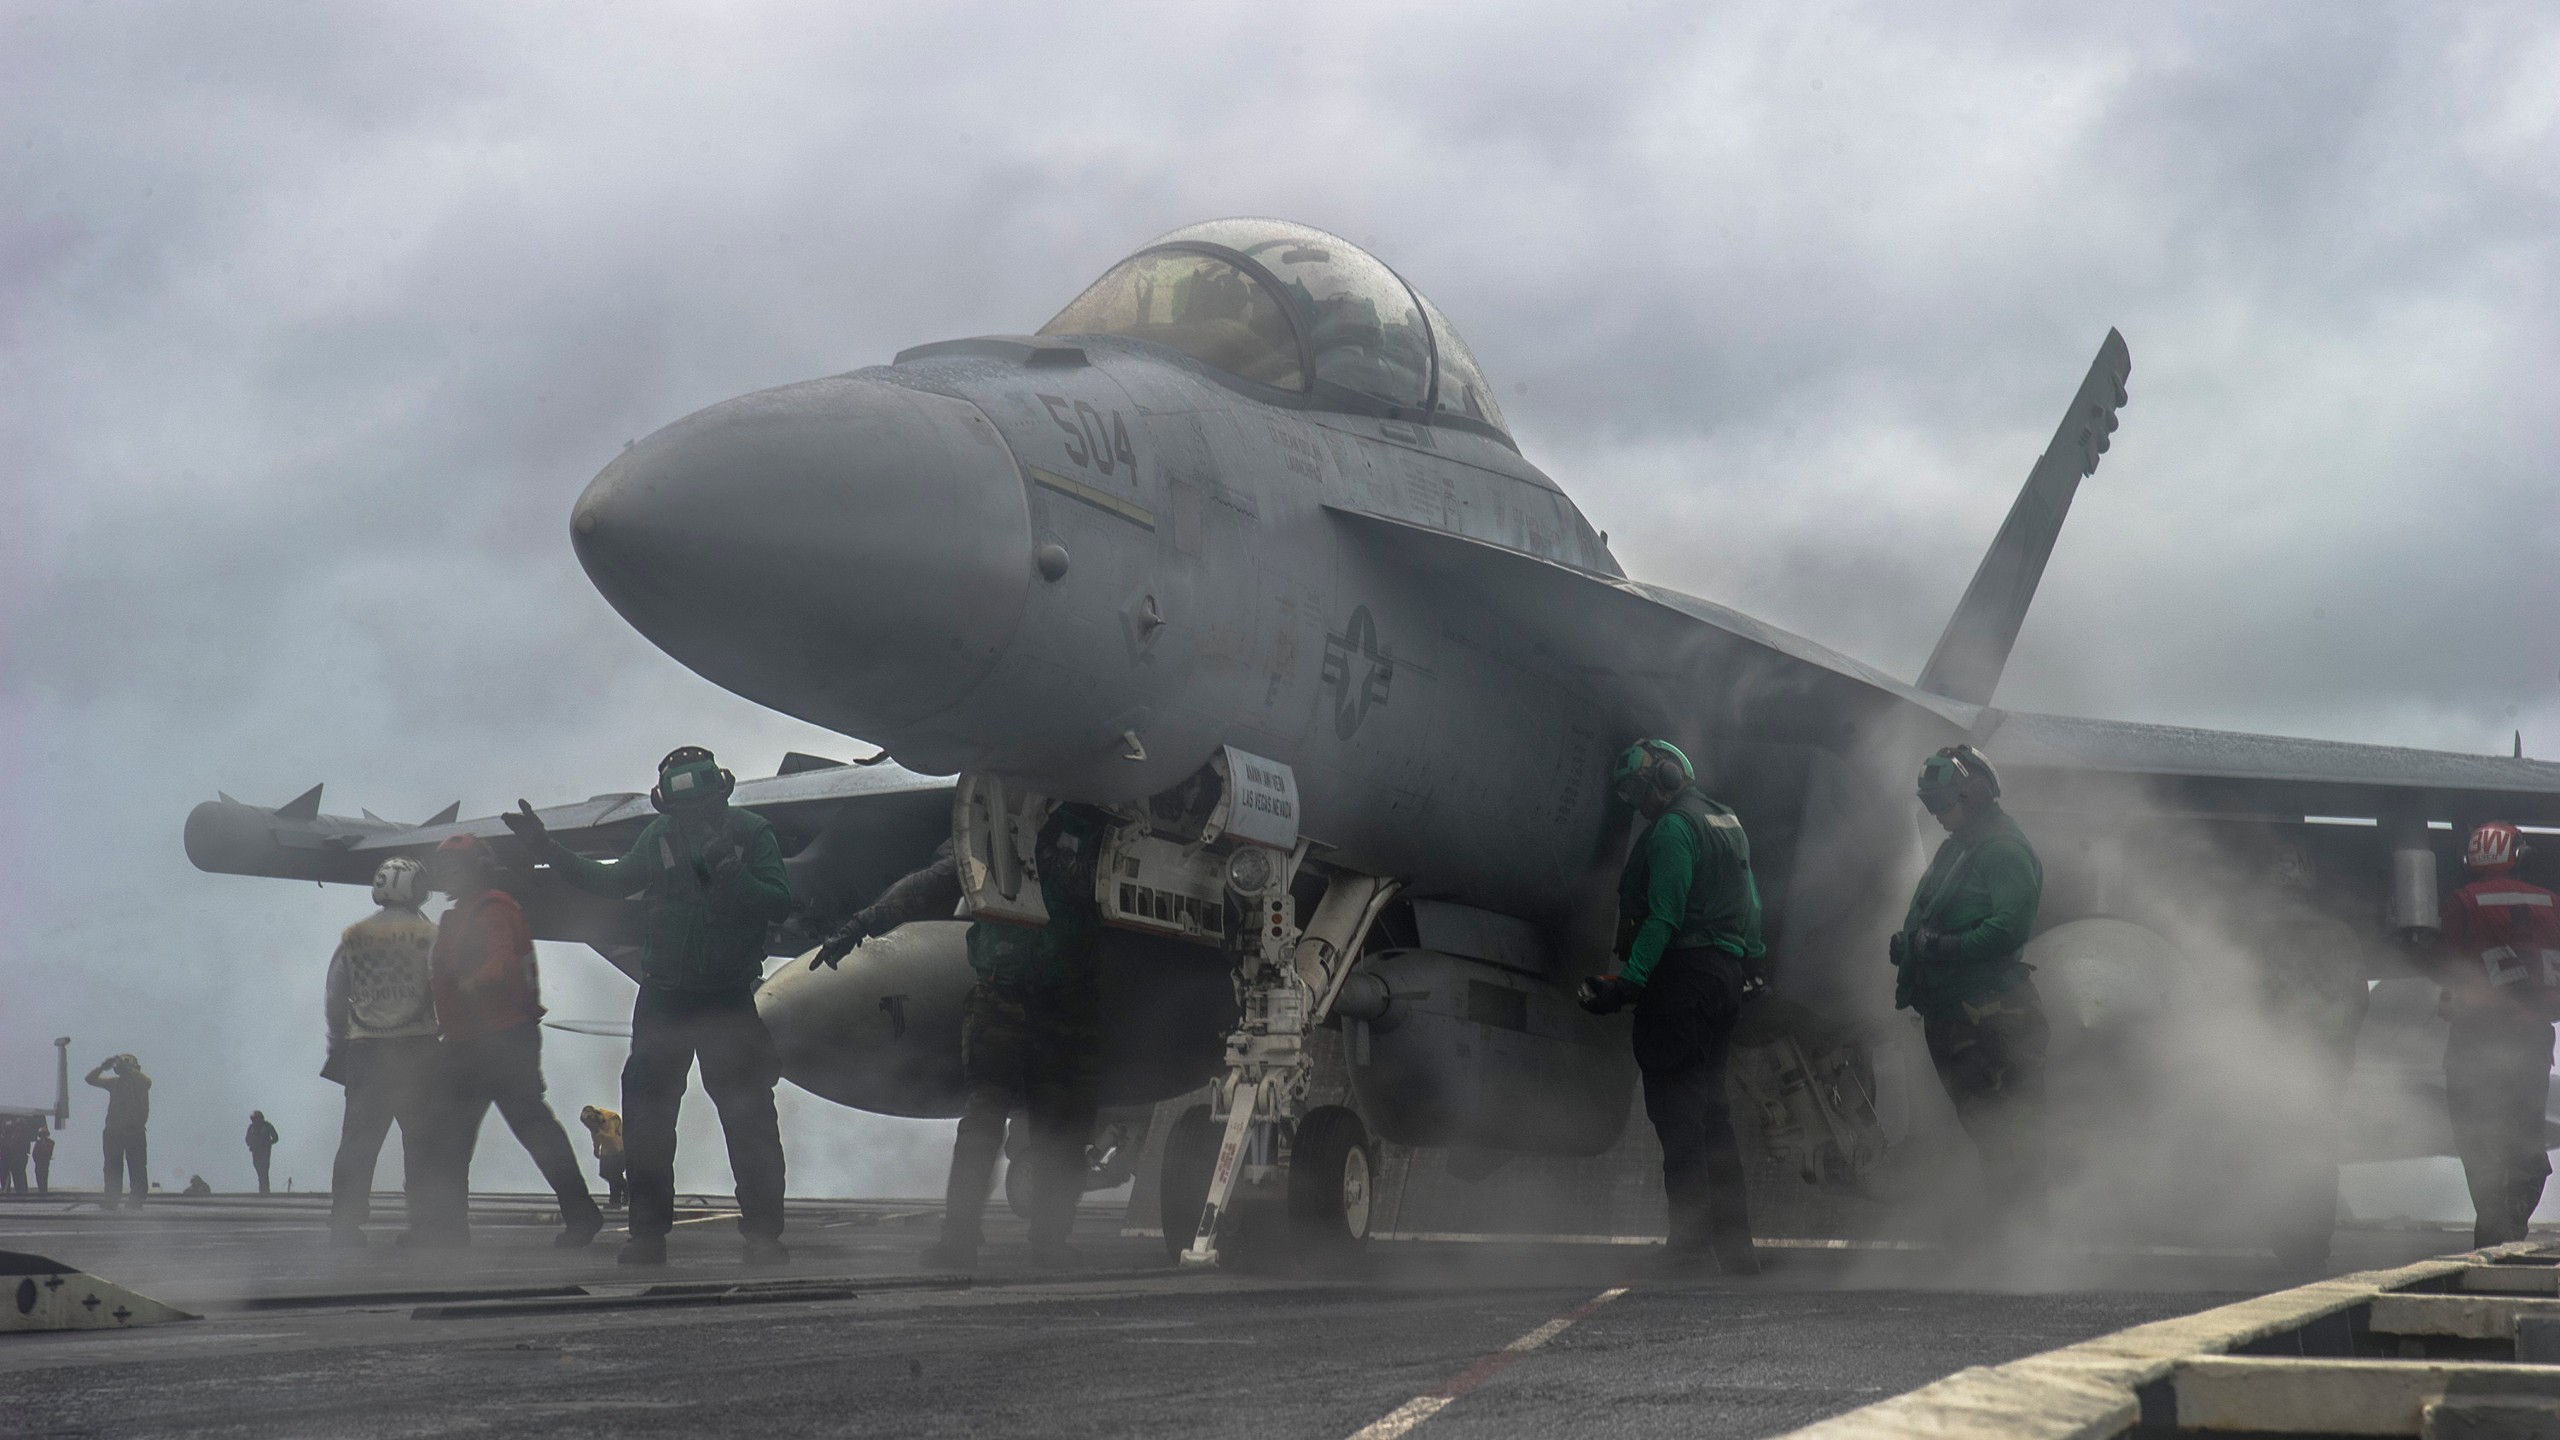 General 2560x1440 military military aircraft jet fighter aircraft carrier McDonnell Douglas F/A-18 Hornet vehicle military vehicle aircraft American aircraft United States Navy smoke McDonnell Douglas